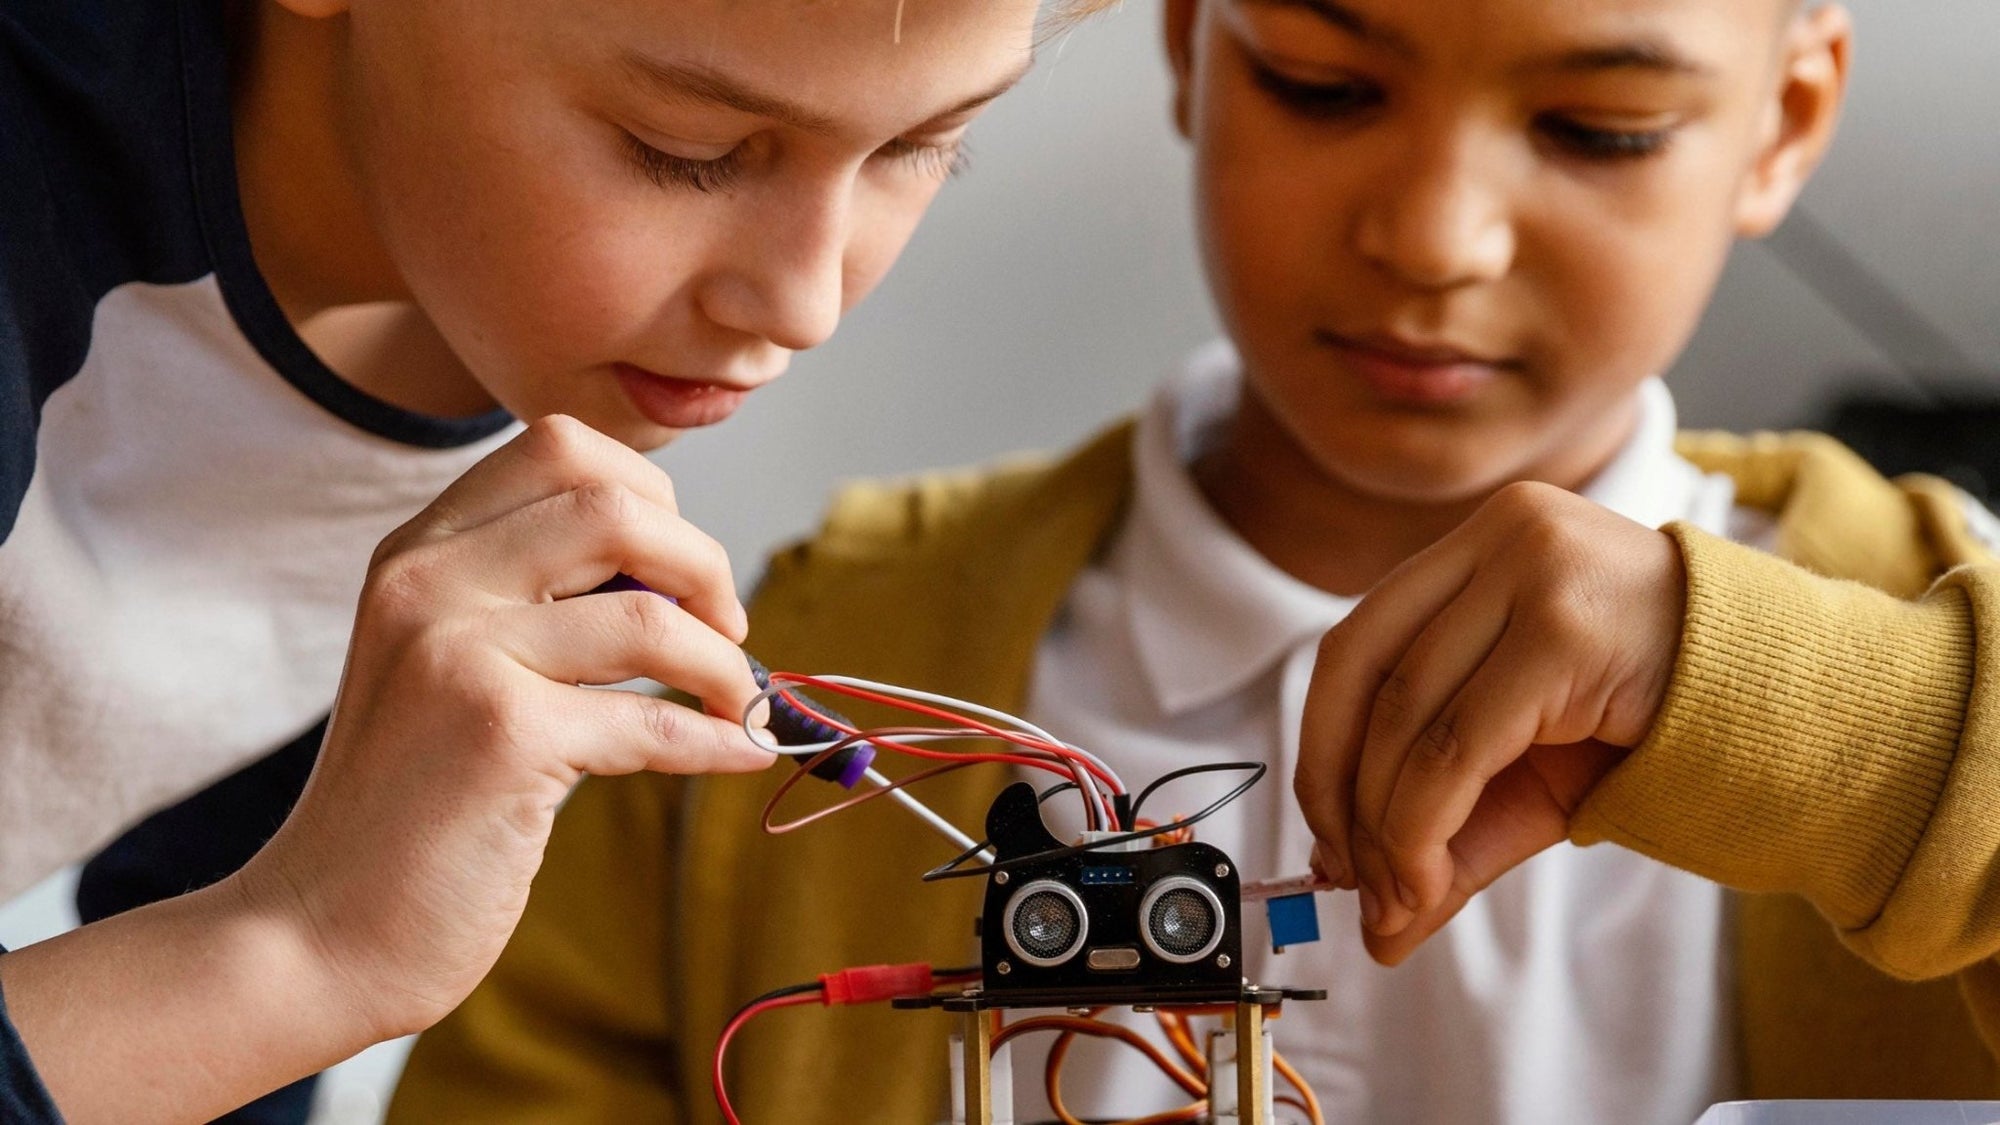 How DIY STEAM Activities Can Help Educate & Inspire Kids  - Inspirely | STEAM Education